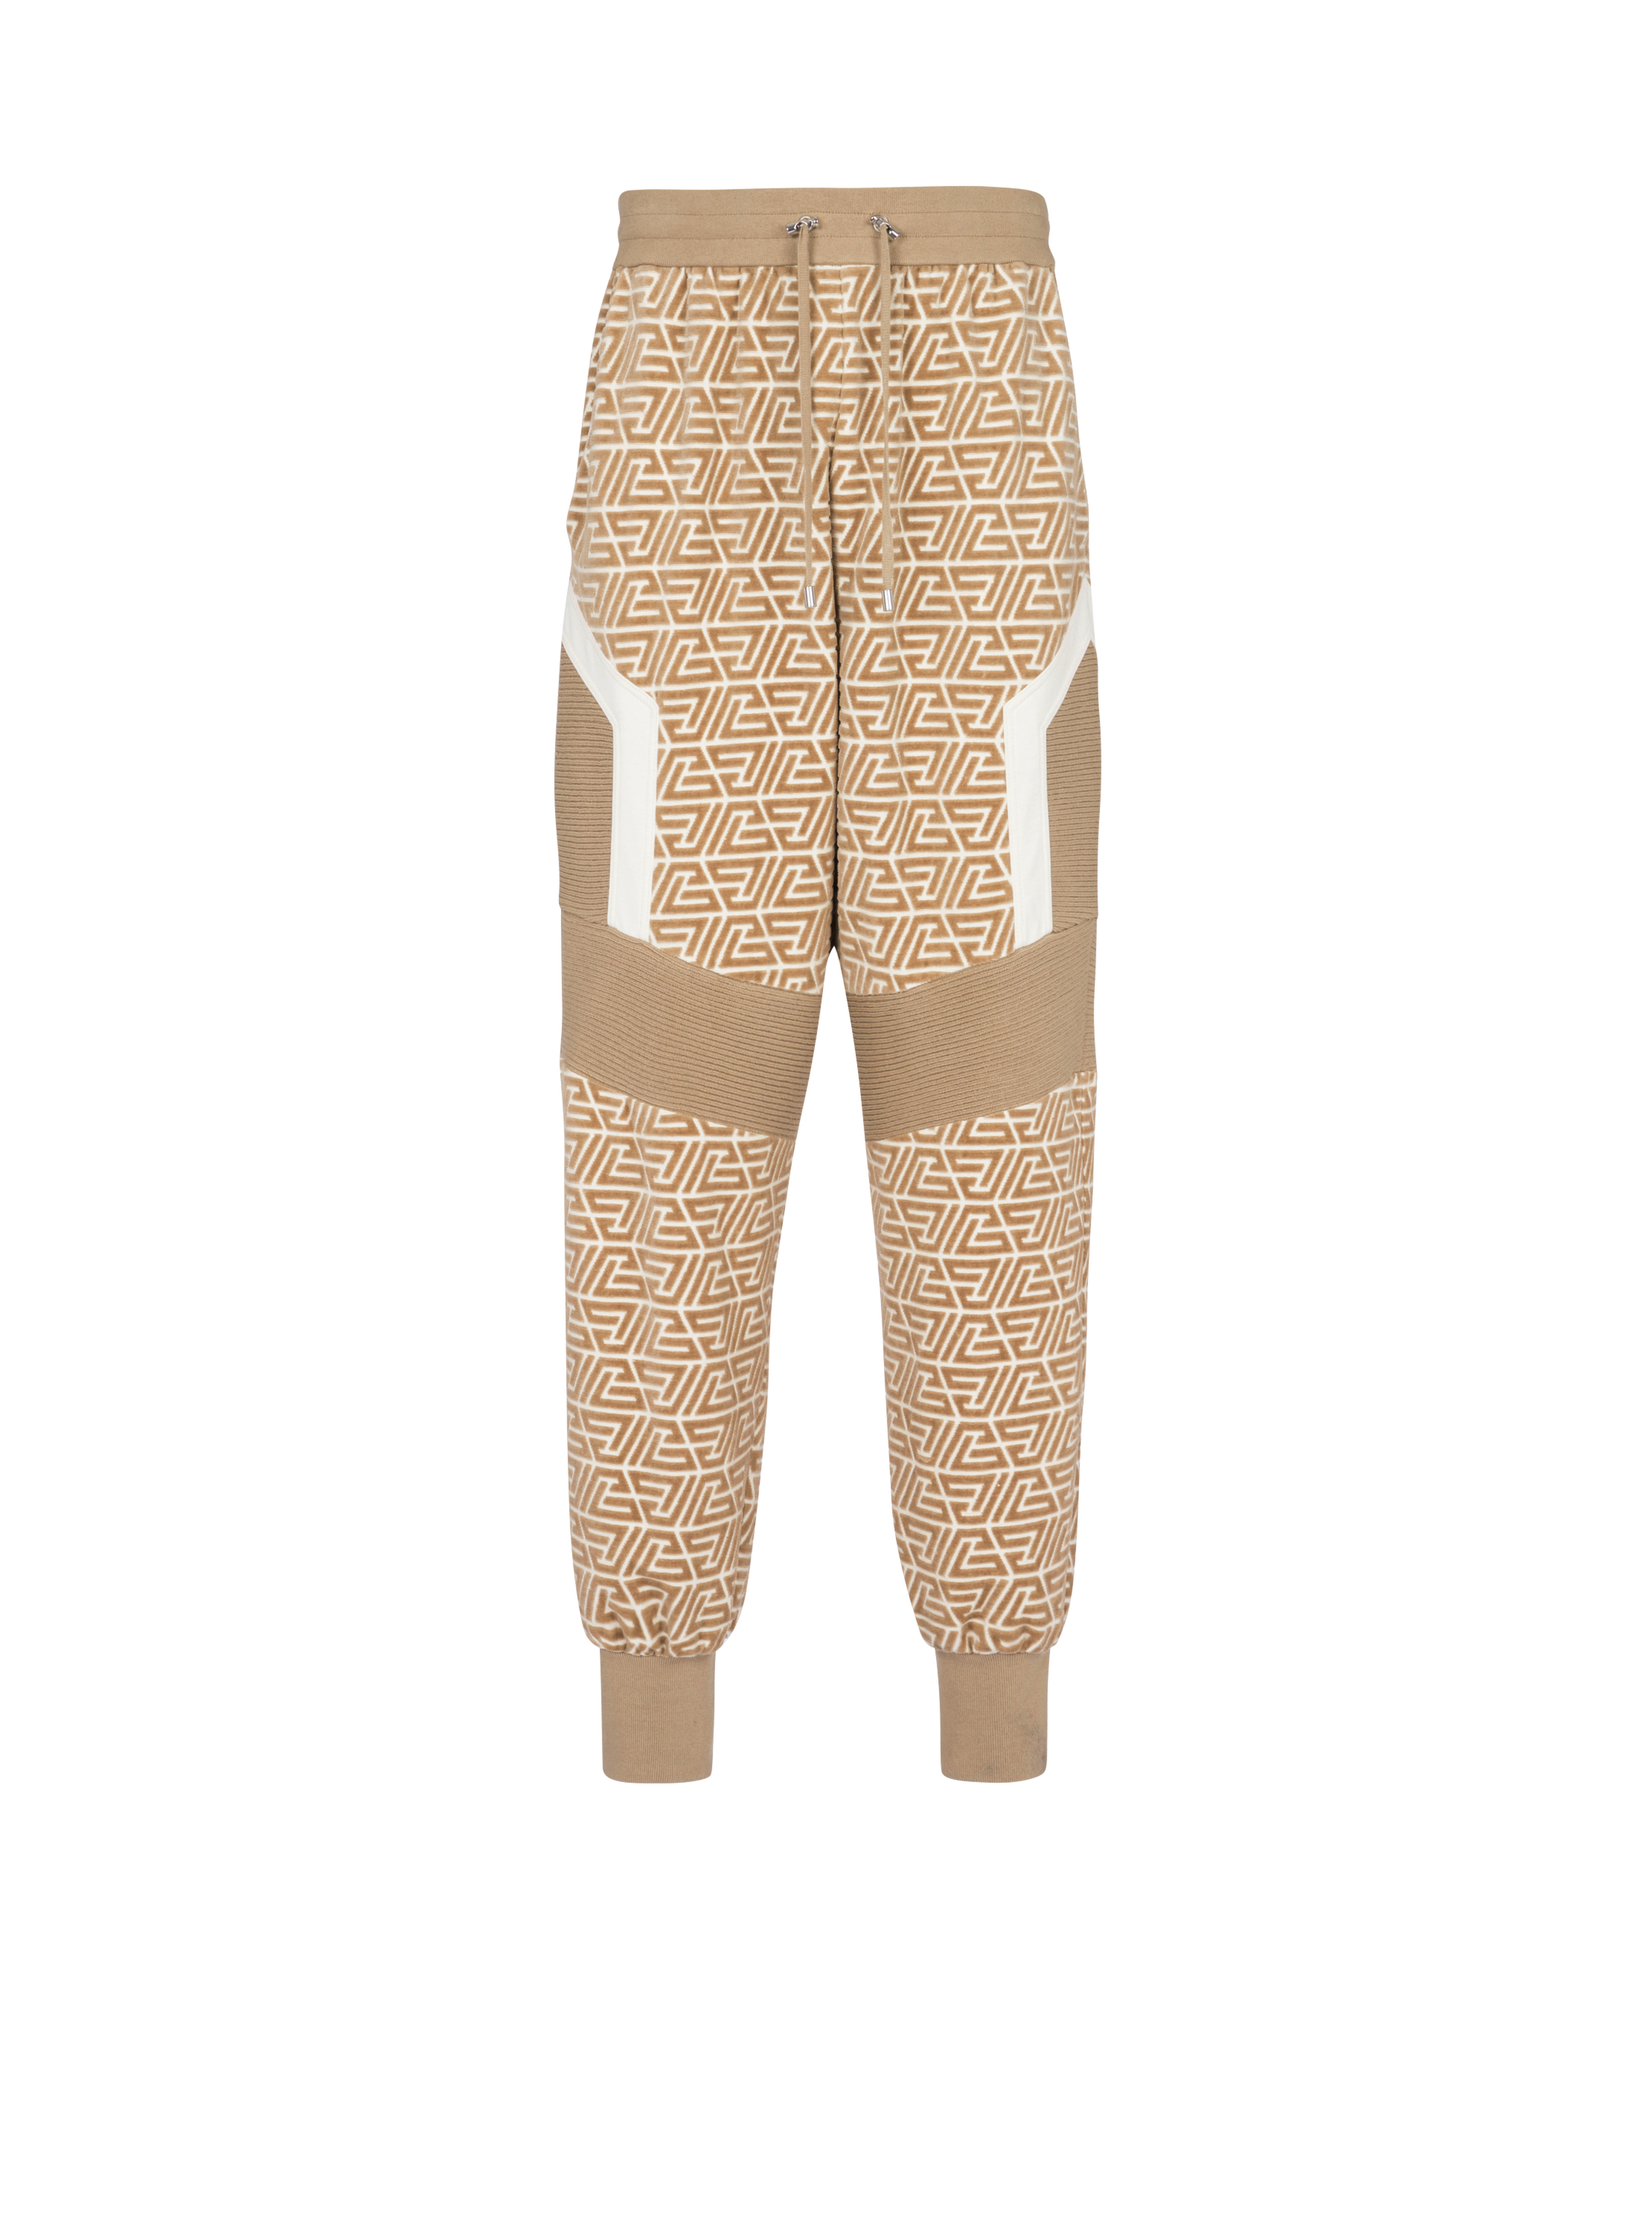 Jogging bottoms with printed pyramid monogram, beige